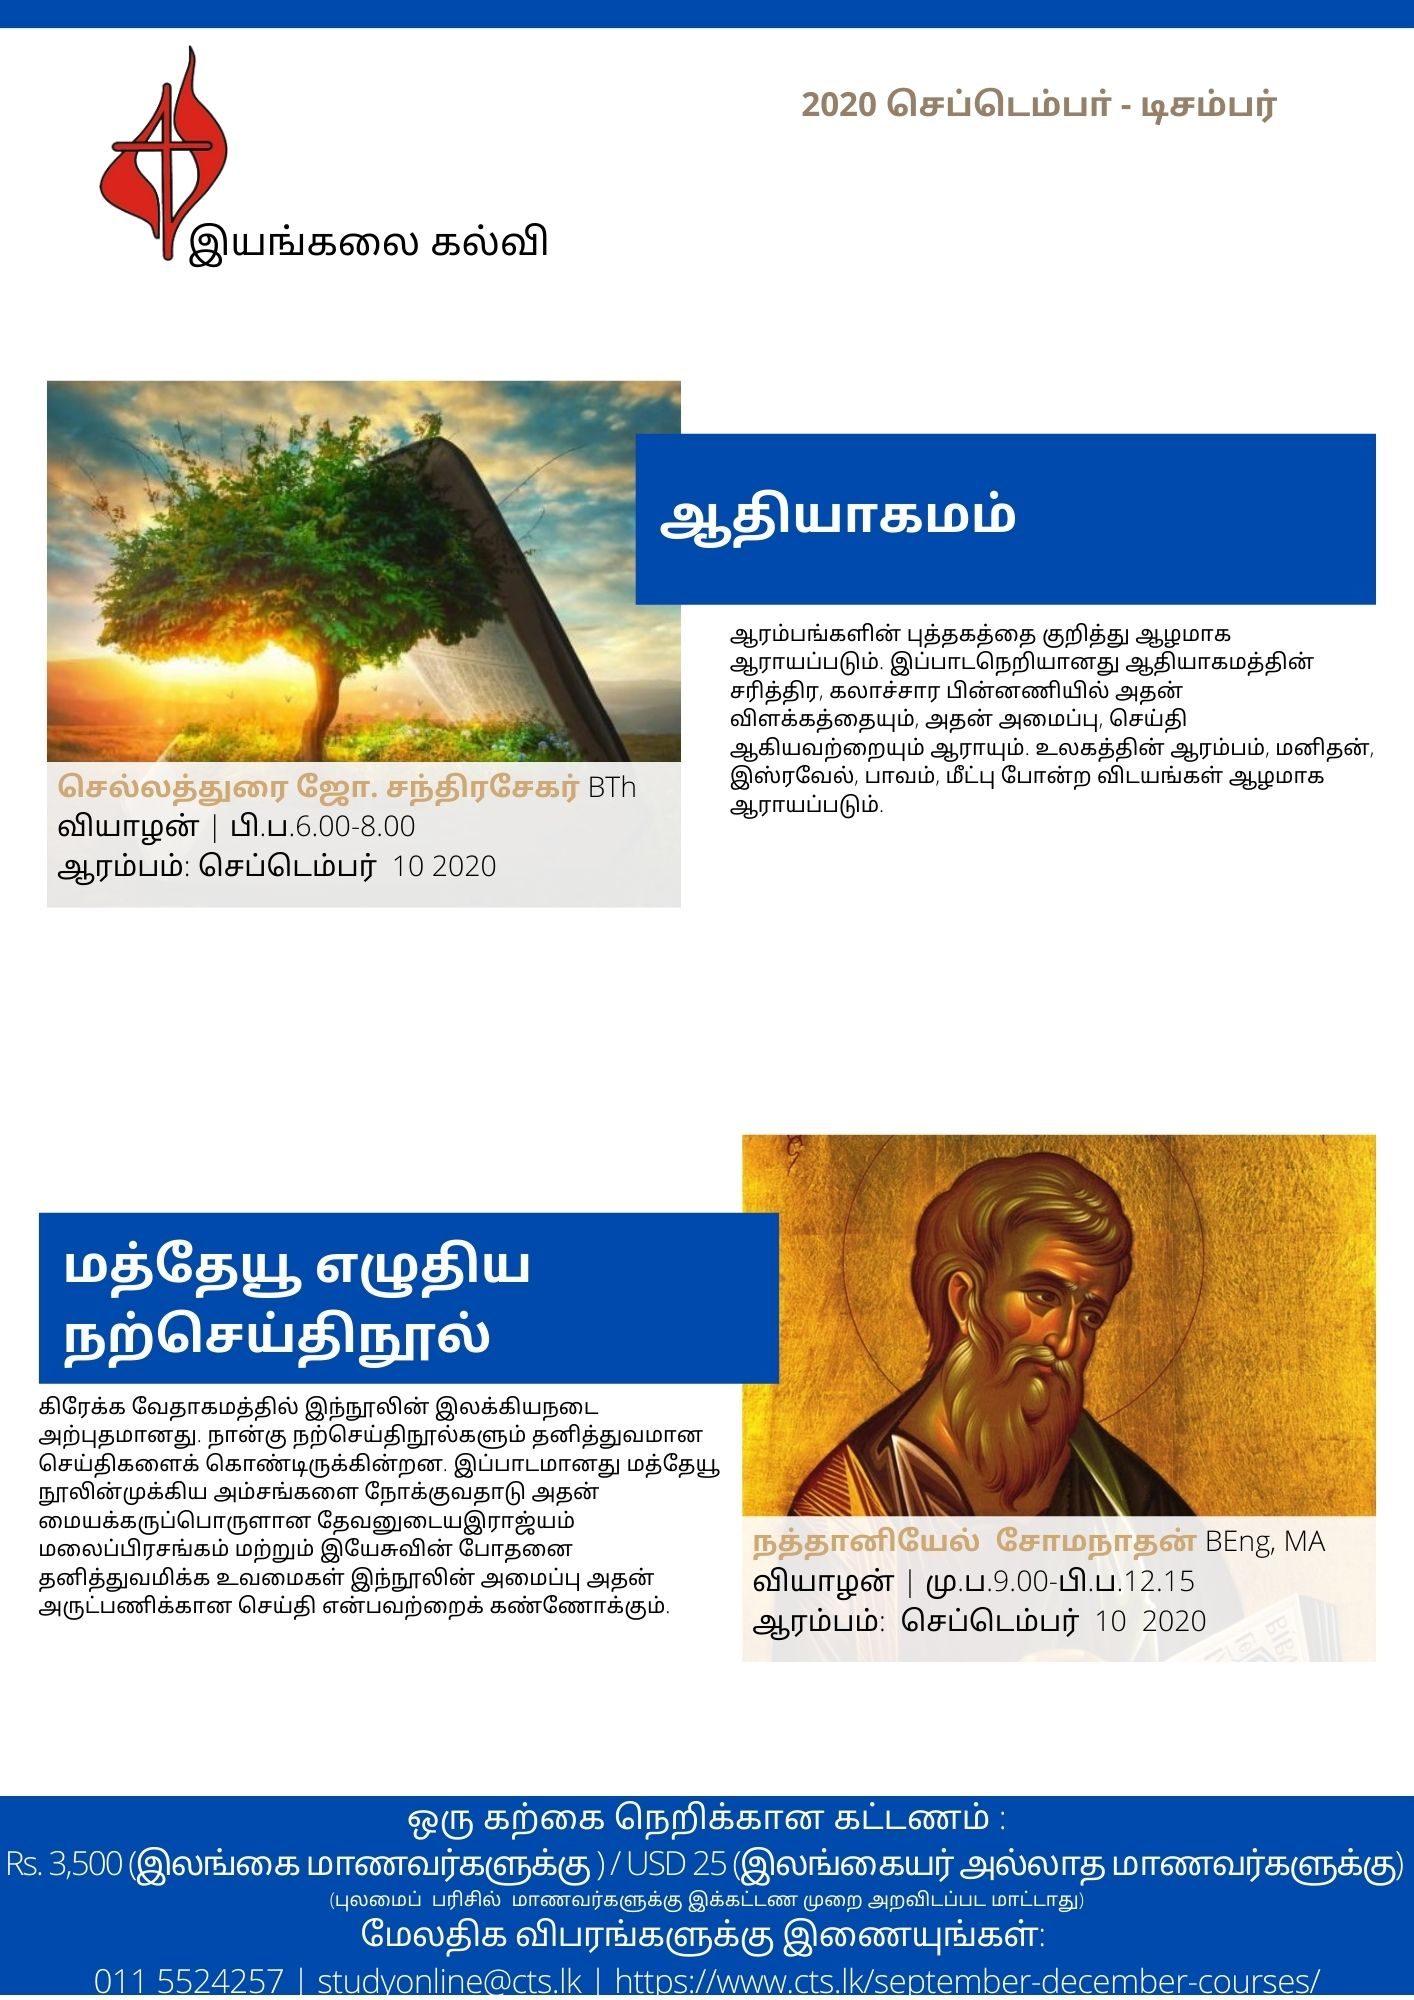 https://www.cts.lk/wp-content/uploads/2020/08/Term-3-grouped-Tamil-Online-2-1414x2000.jpg